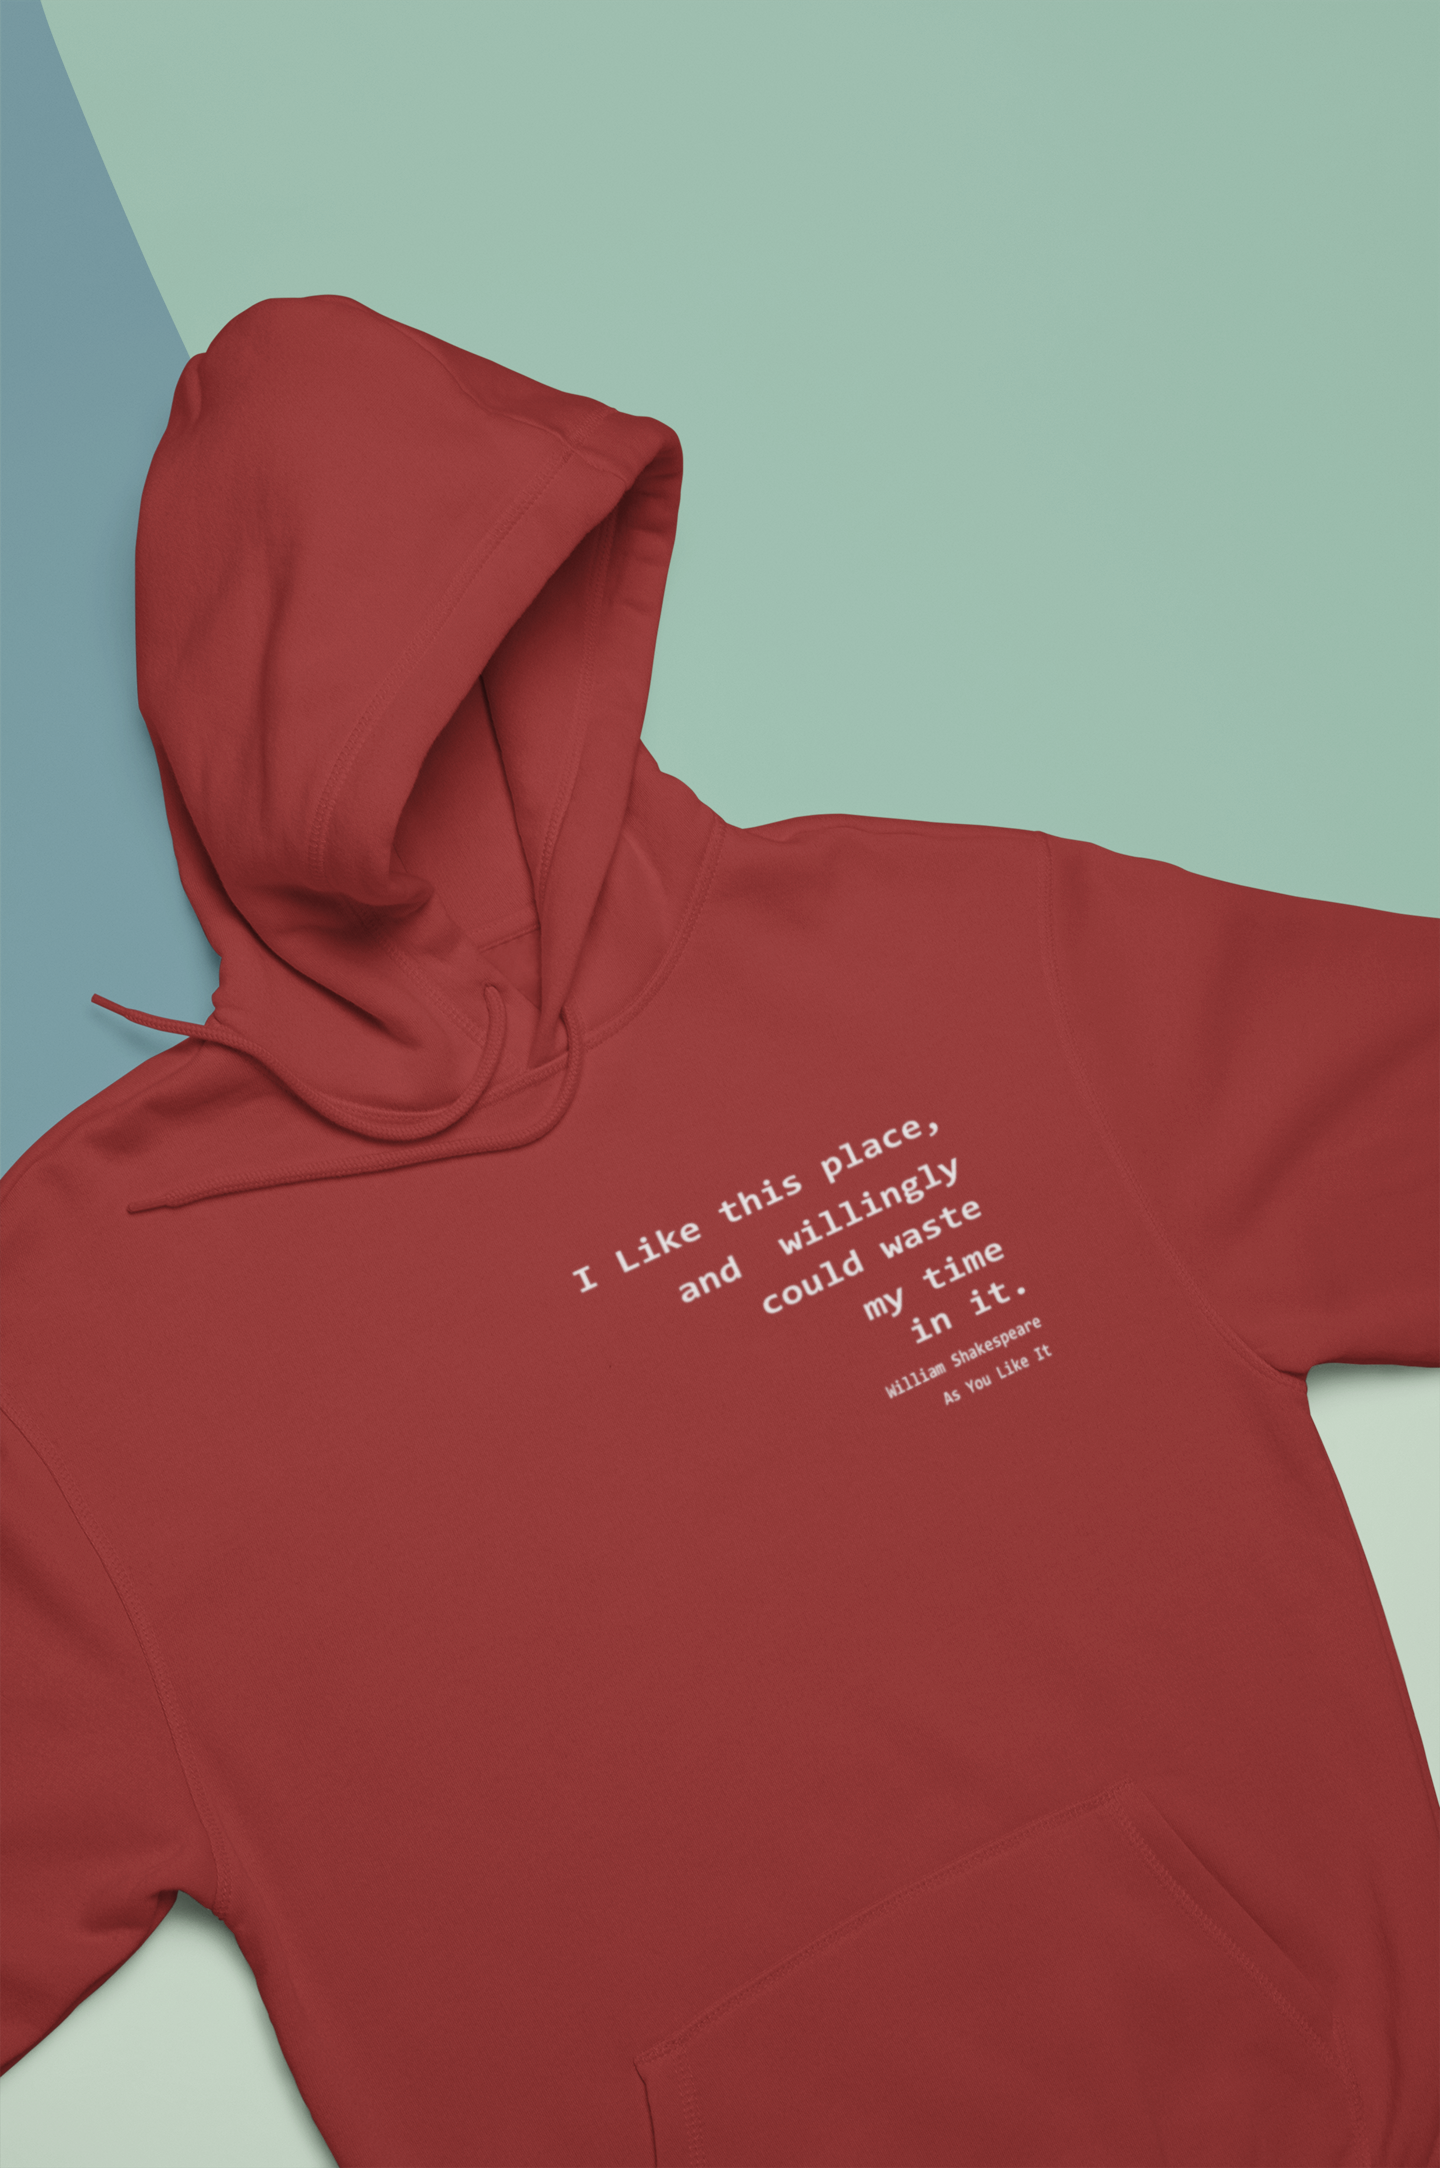 I Like This Place Quotes Hoodies for Women-FunkyTeesClub